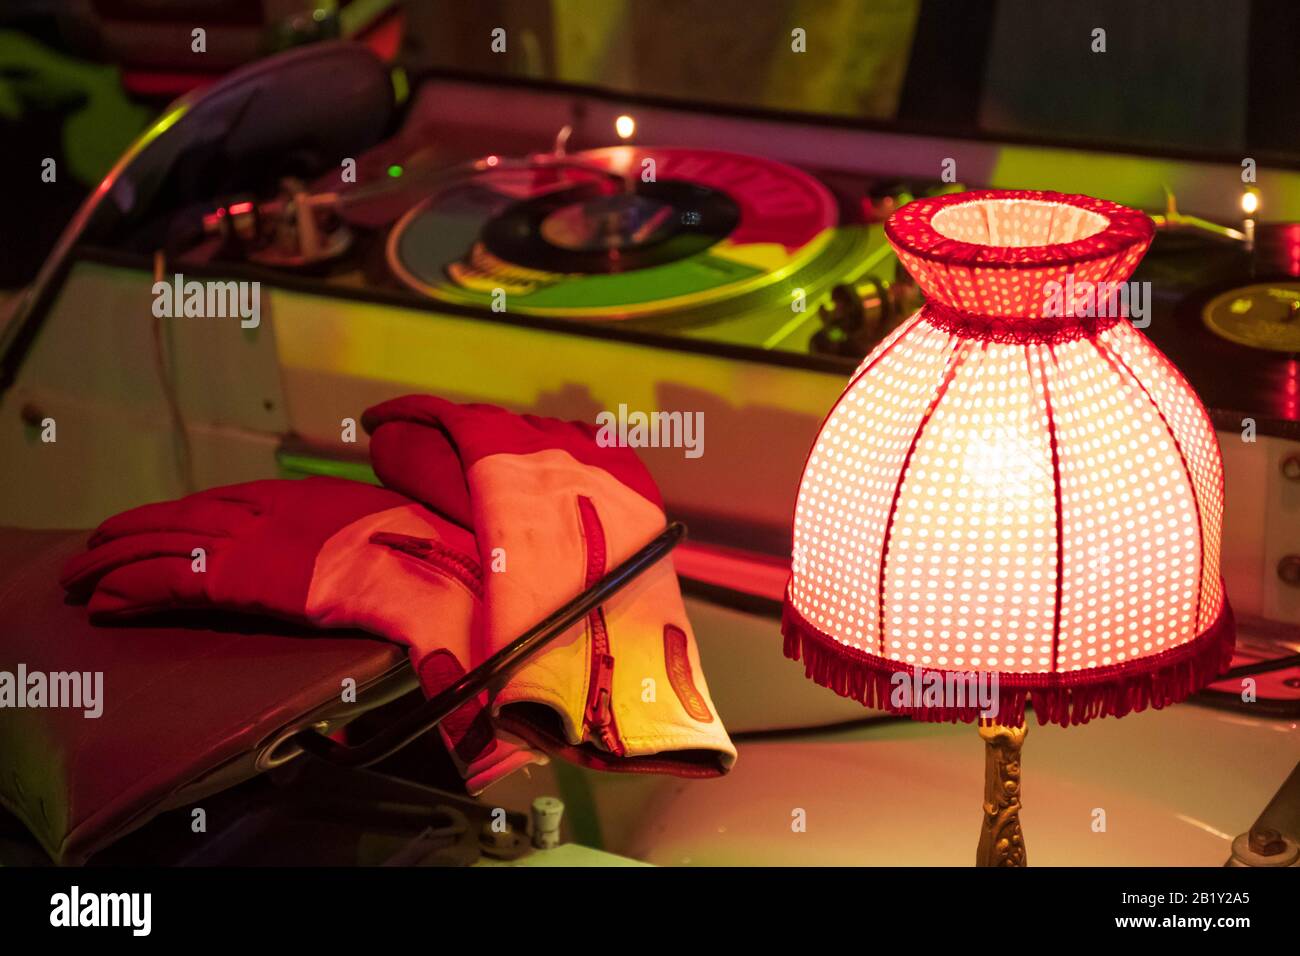 DJ set, deejay console and sound equipment for vinyls at nightclub or music festival white lamp and gloves, retro style vinyls player and fashion Stock Photo